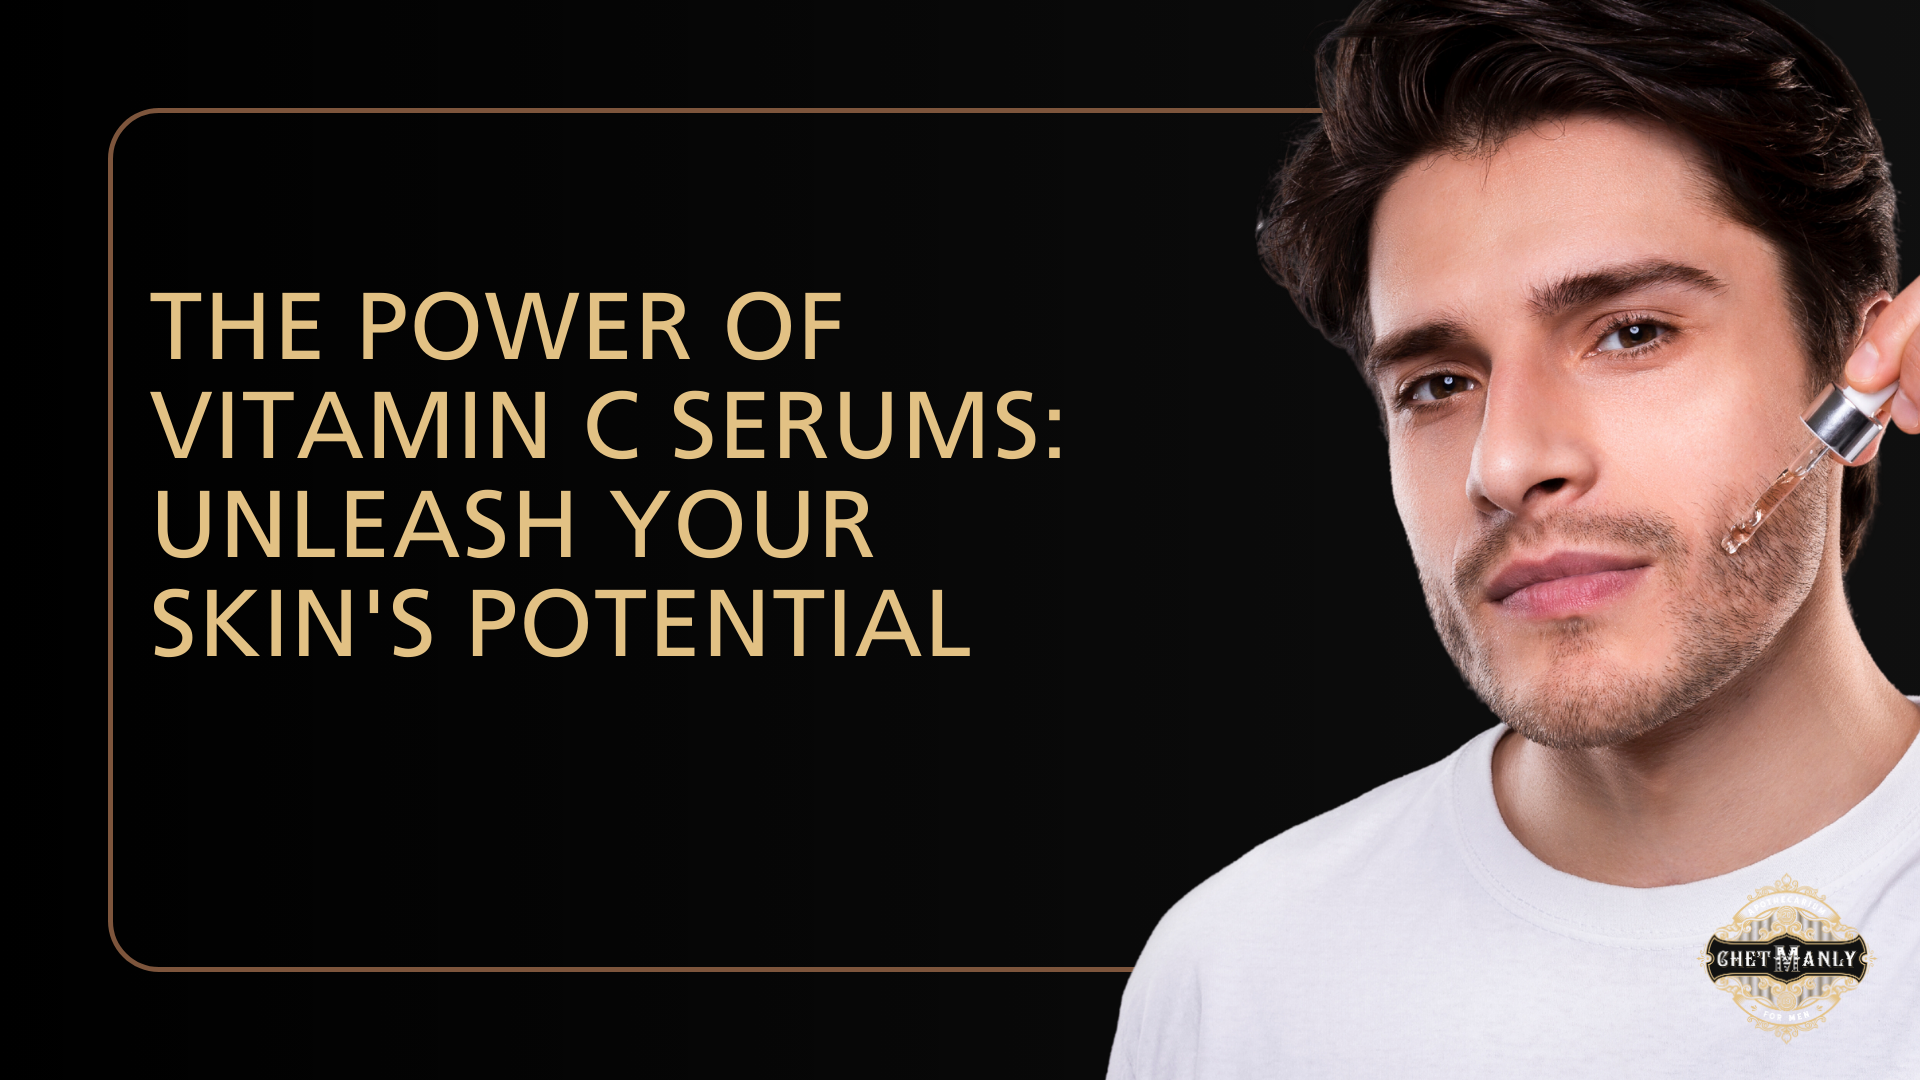 The Power of Vitamin C Serums: Unleash Your Skin's Potential